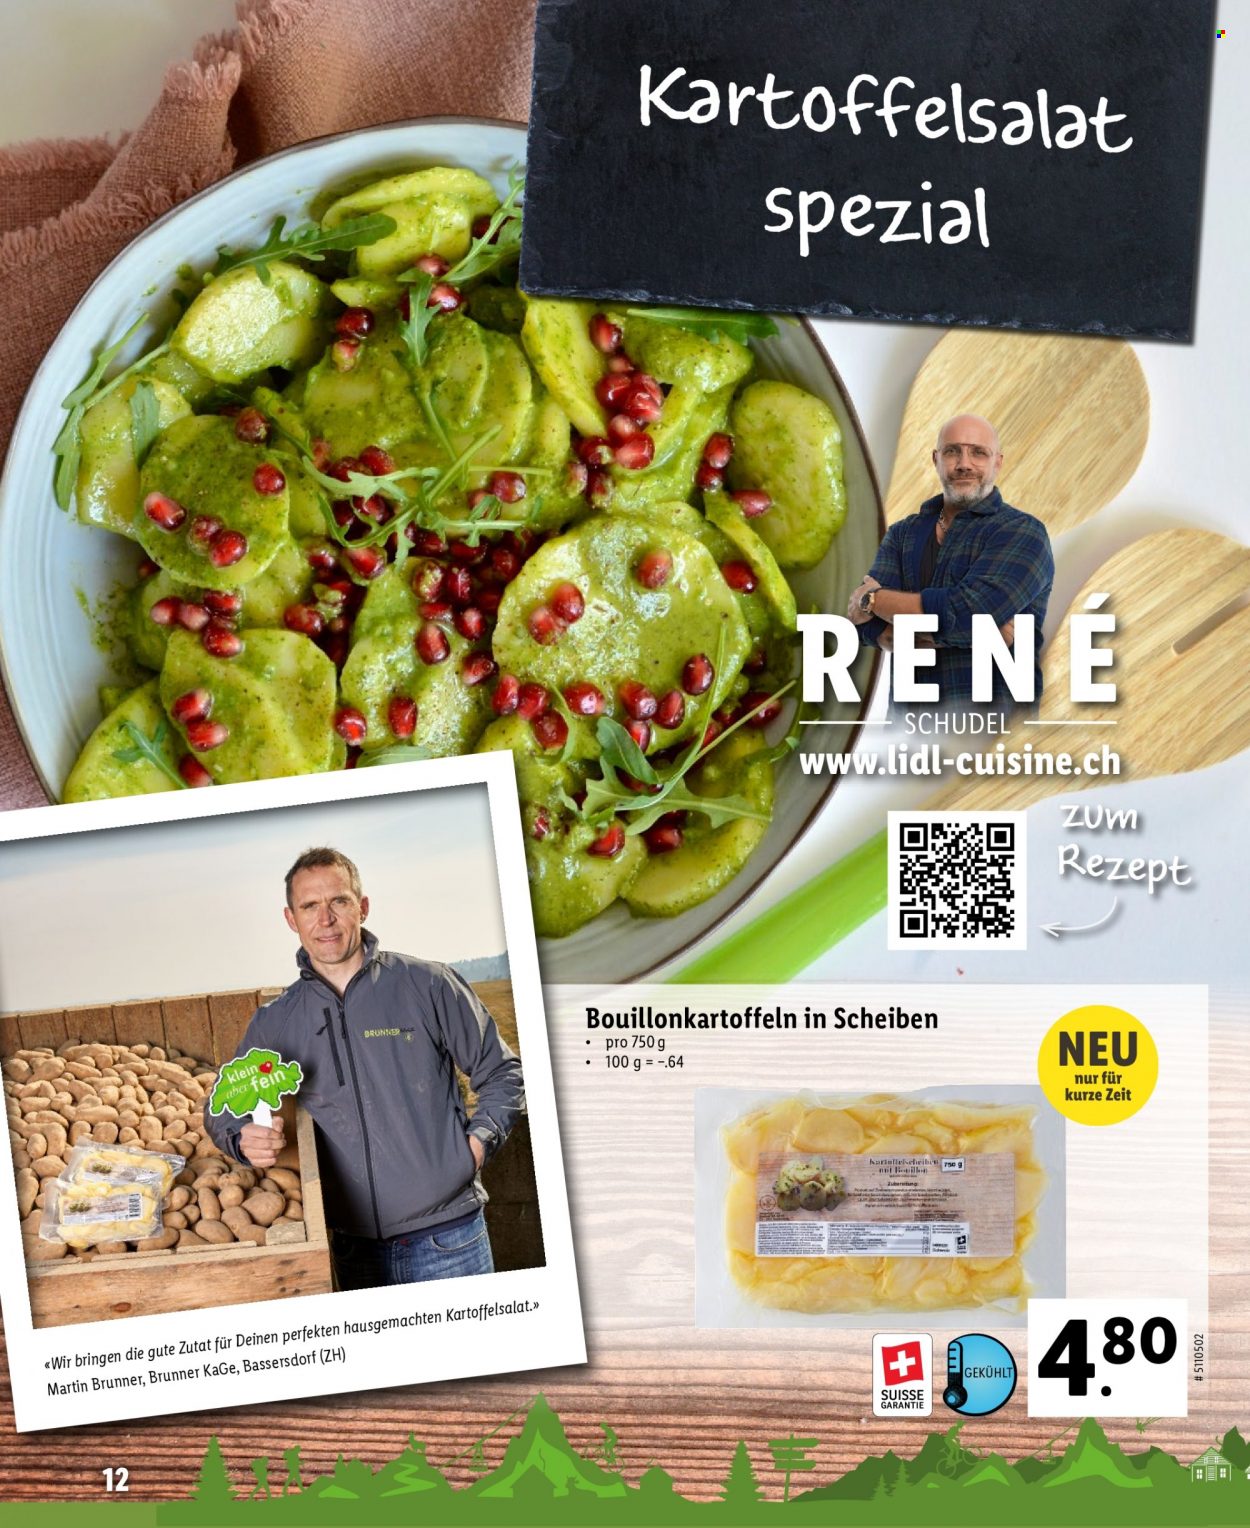 Catalogue Lidl. Page 35.